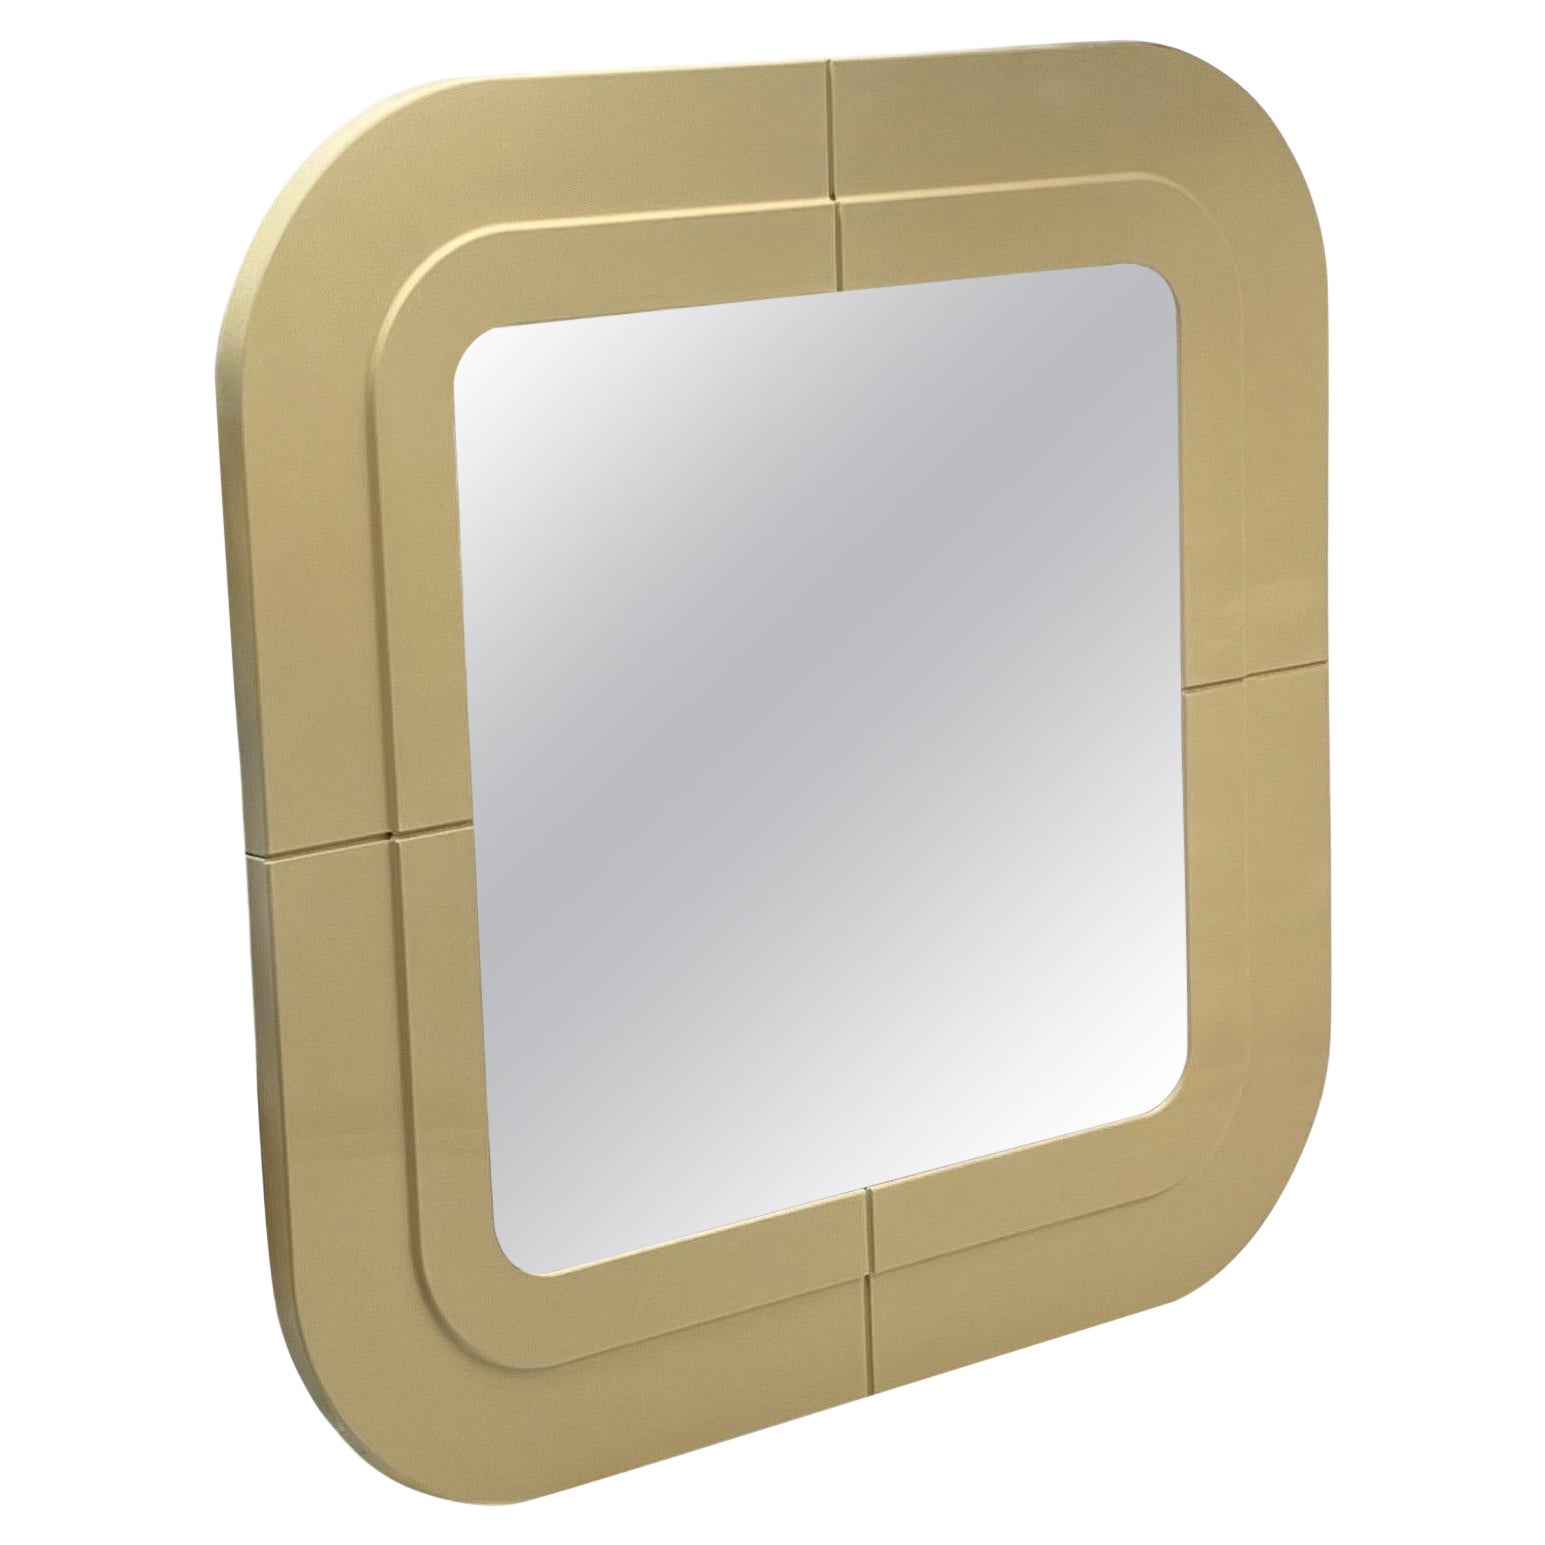 Vintage Wall Mirror by Anna Castelli Ferrieri for Kartell - 1960s For Sale